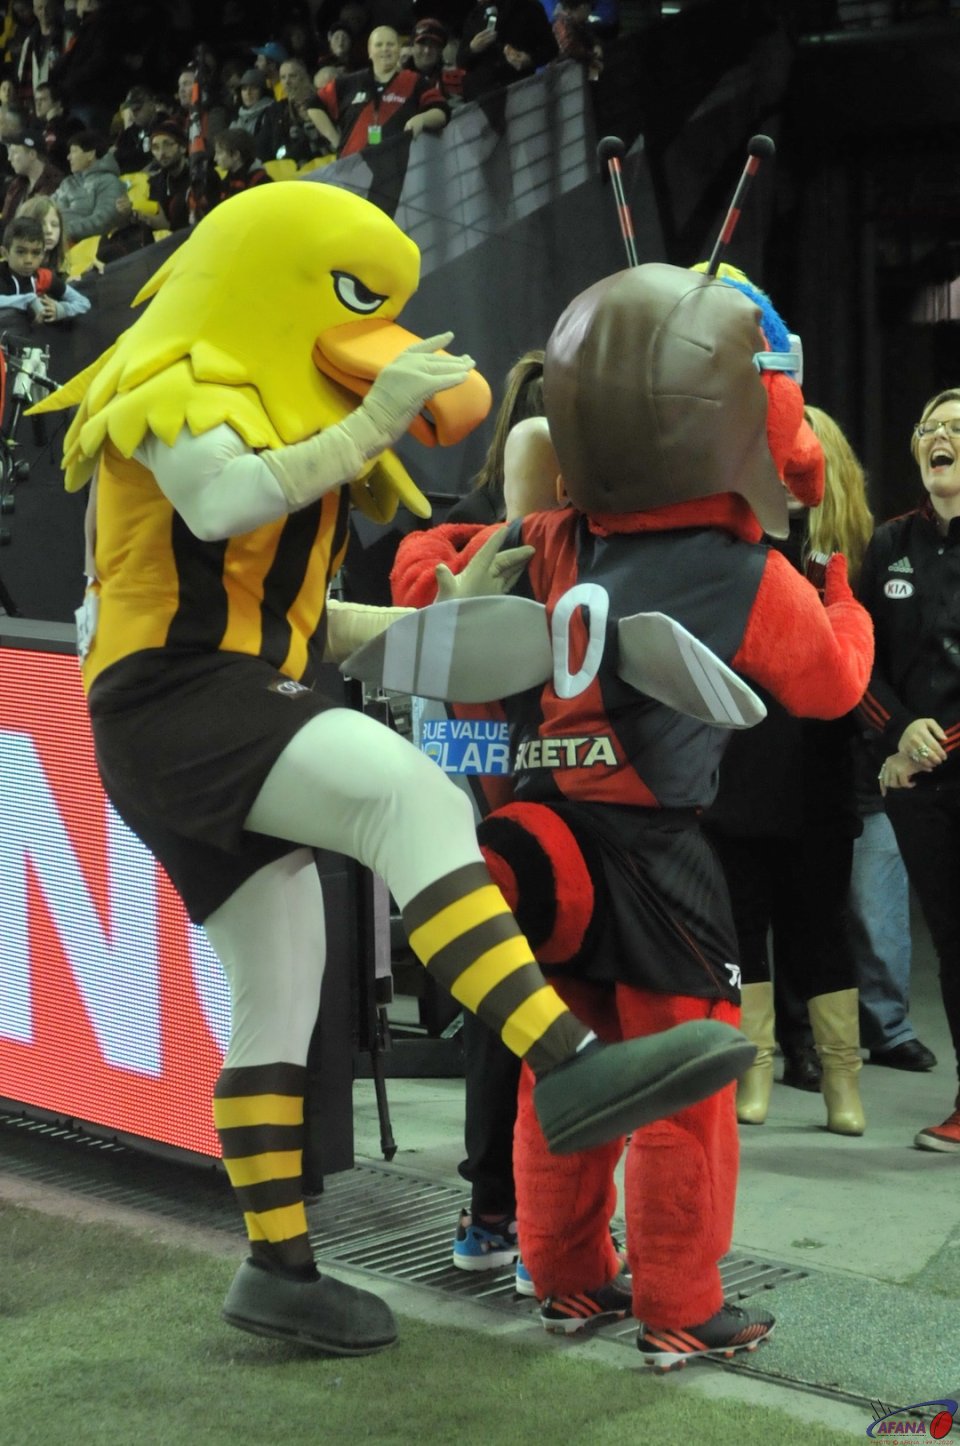 Sign of things to come, Mascot wars, with Hawker spanking Skeeta